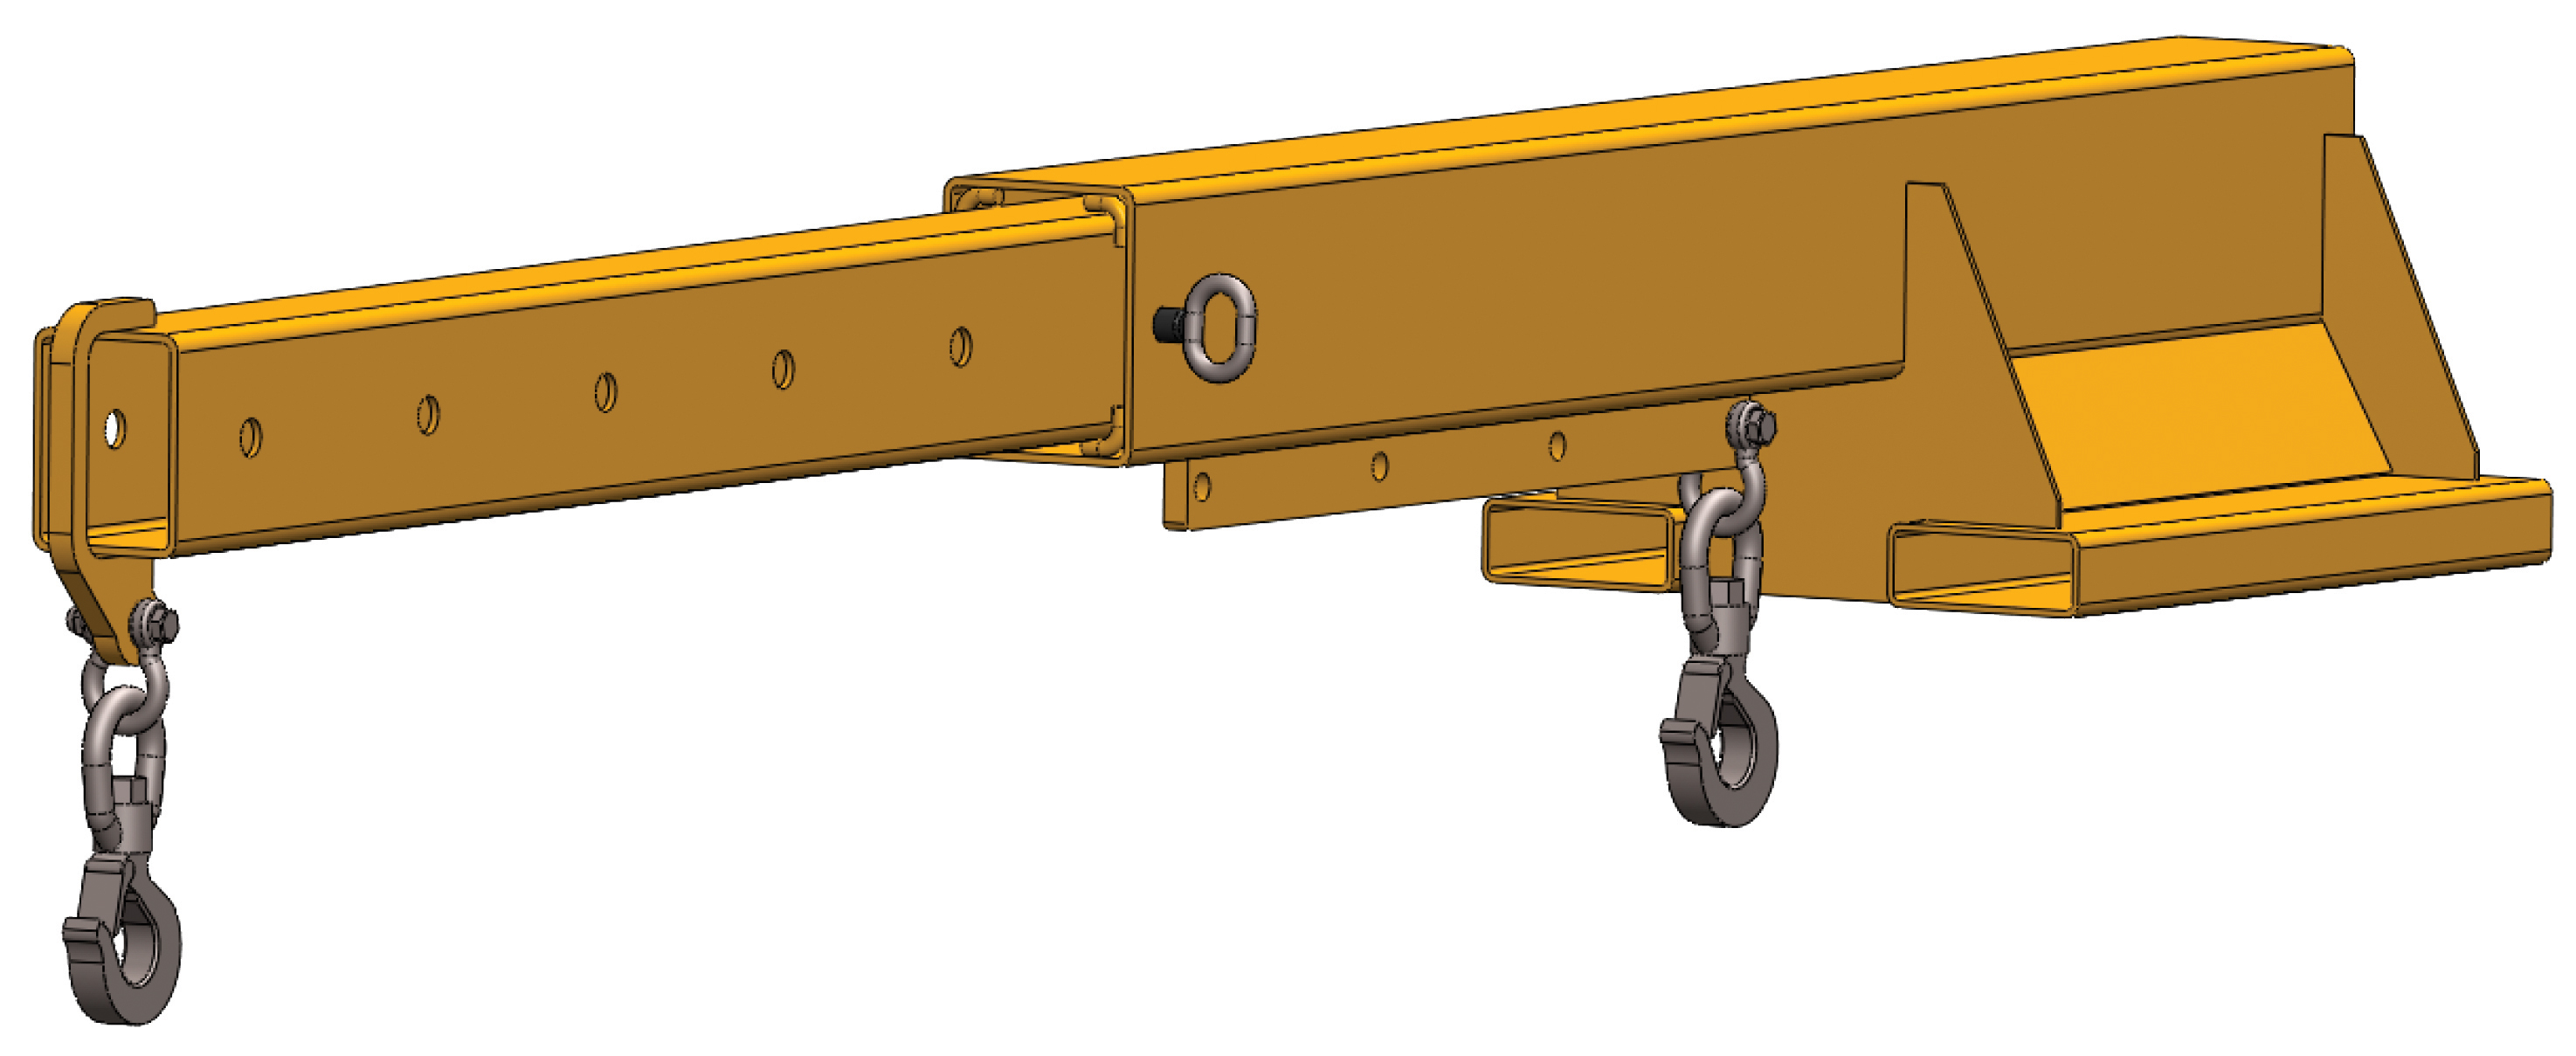 Forklift Lifting Attachments And Accessories